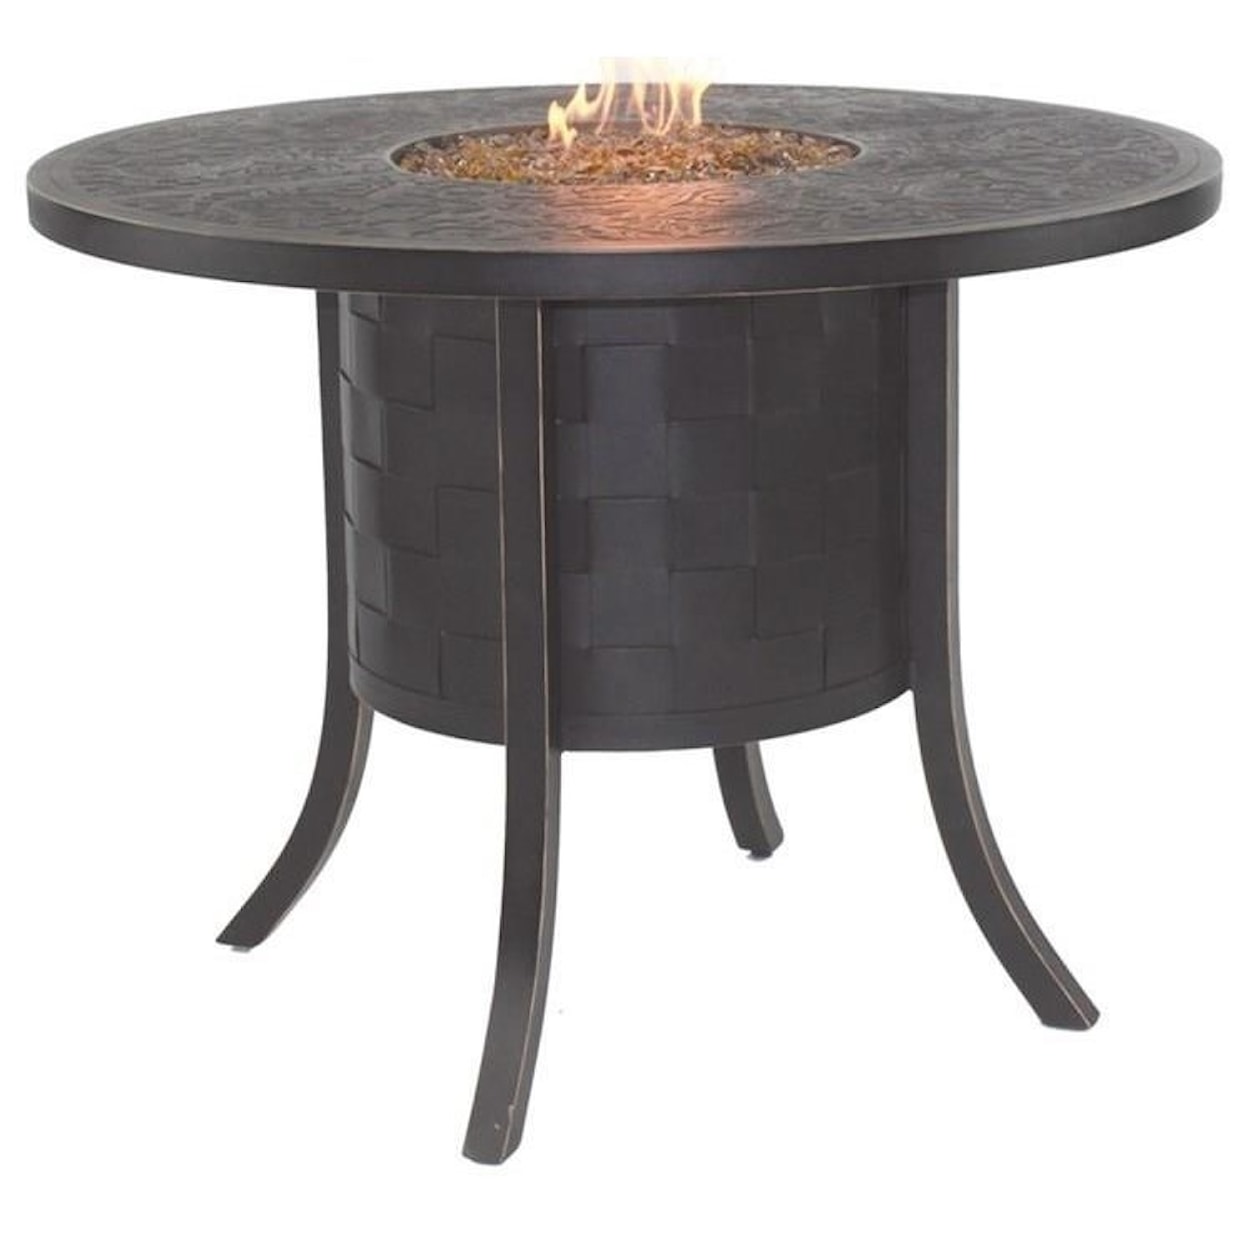 Castelle by Pride Family Brands Classical Firepits 49" Round Counter Table with Firepit